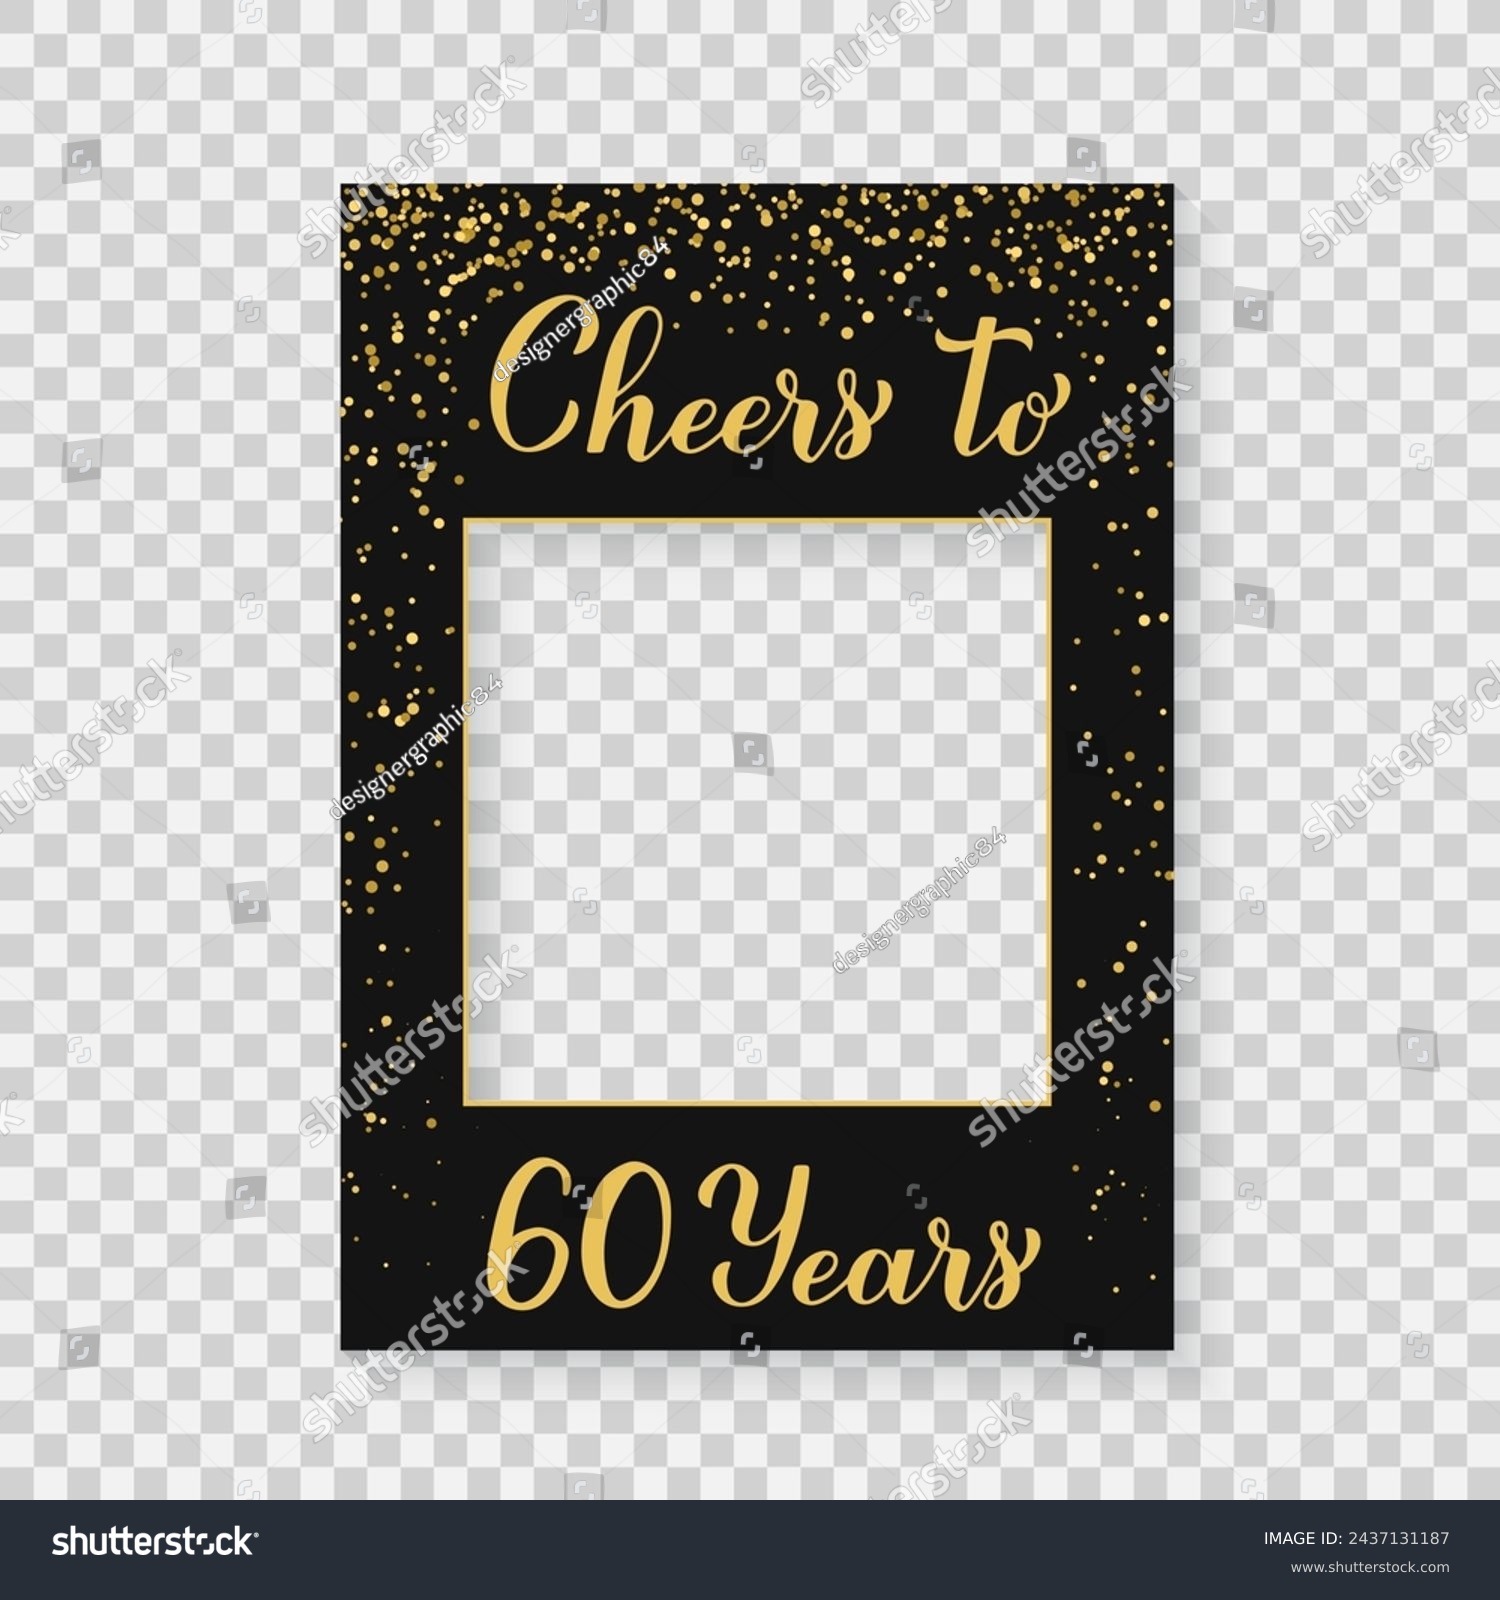 SVG of Cheers to 60 Years photo booth frame on a transparent background. 60th Birthday or anniversary photobooth props. Black and gold confetti party decorations. Vector template. svg